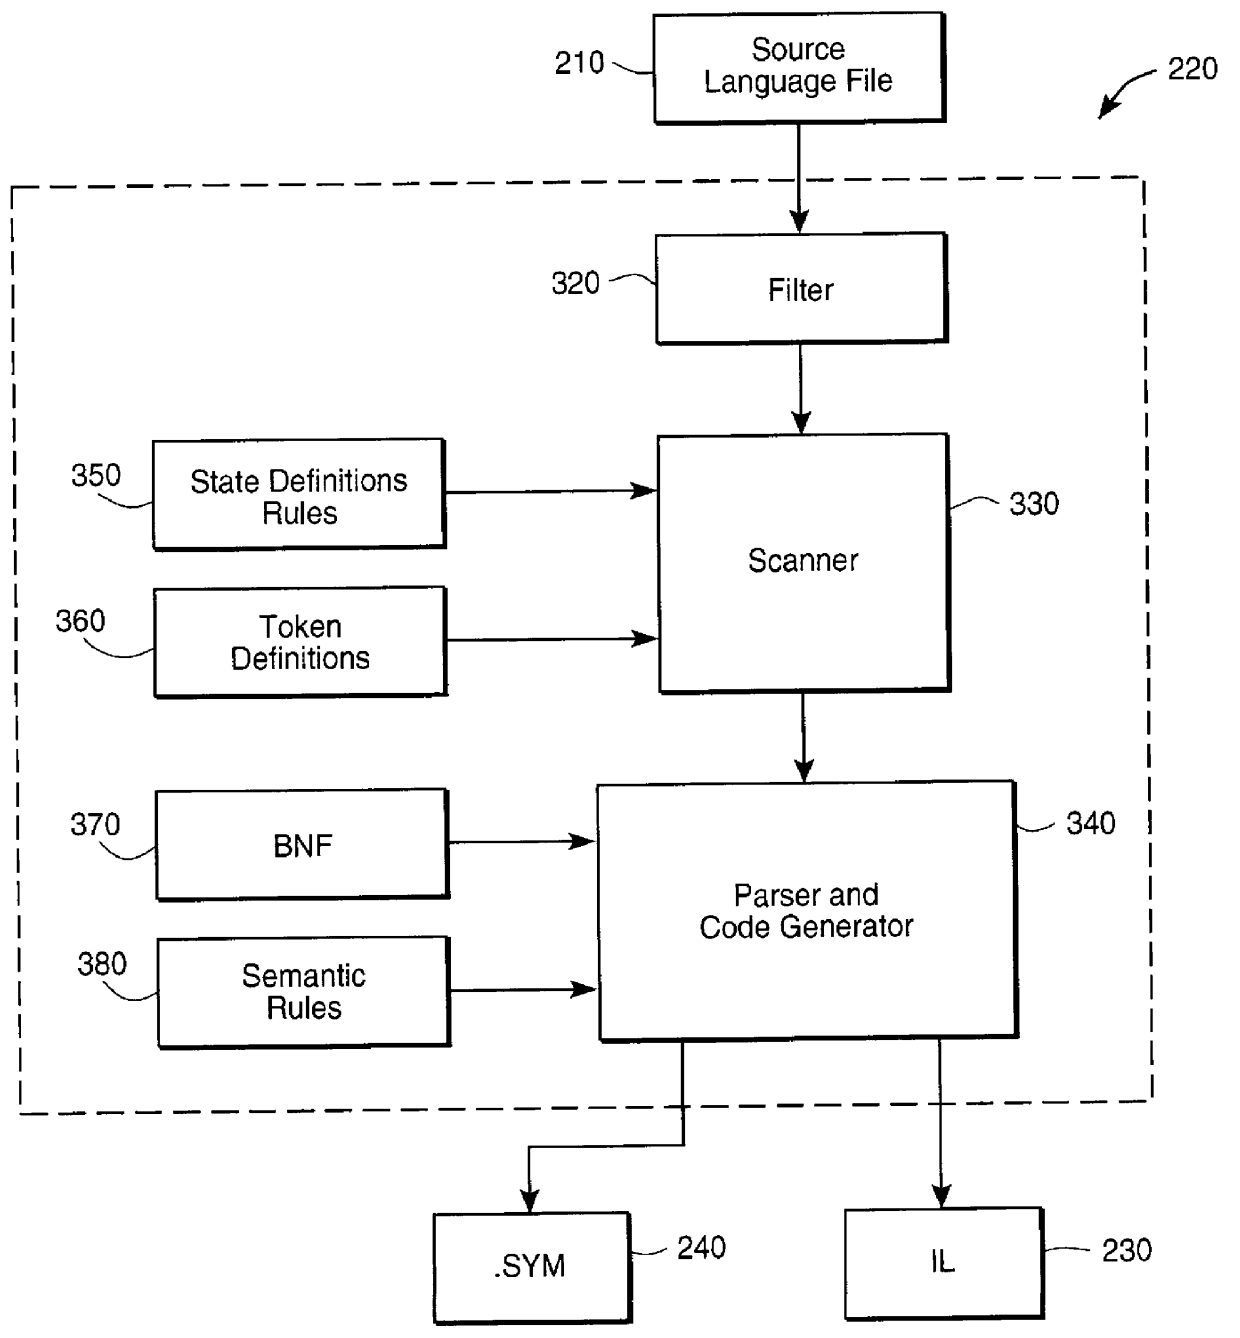 Method and apparatus for analyzing computer code using weakest precondition